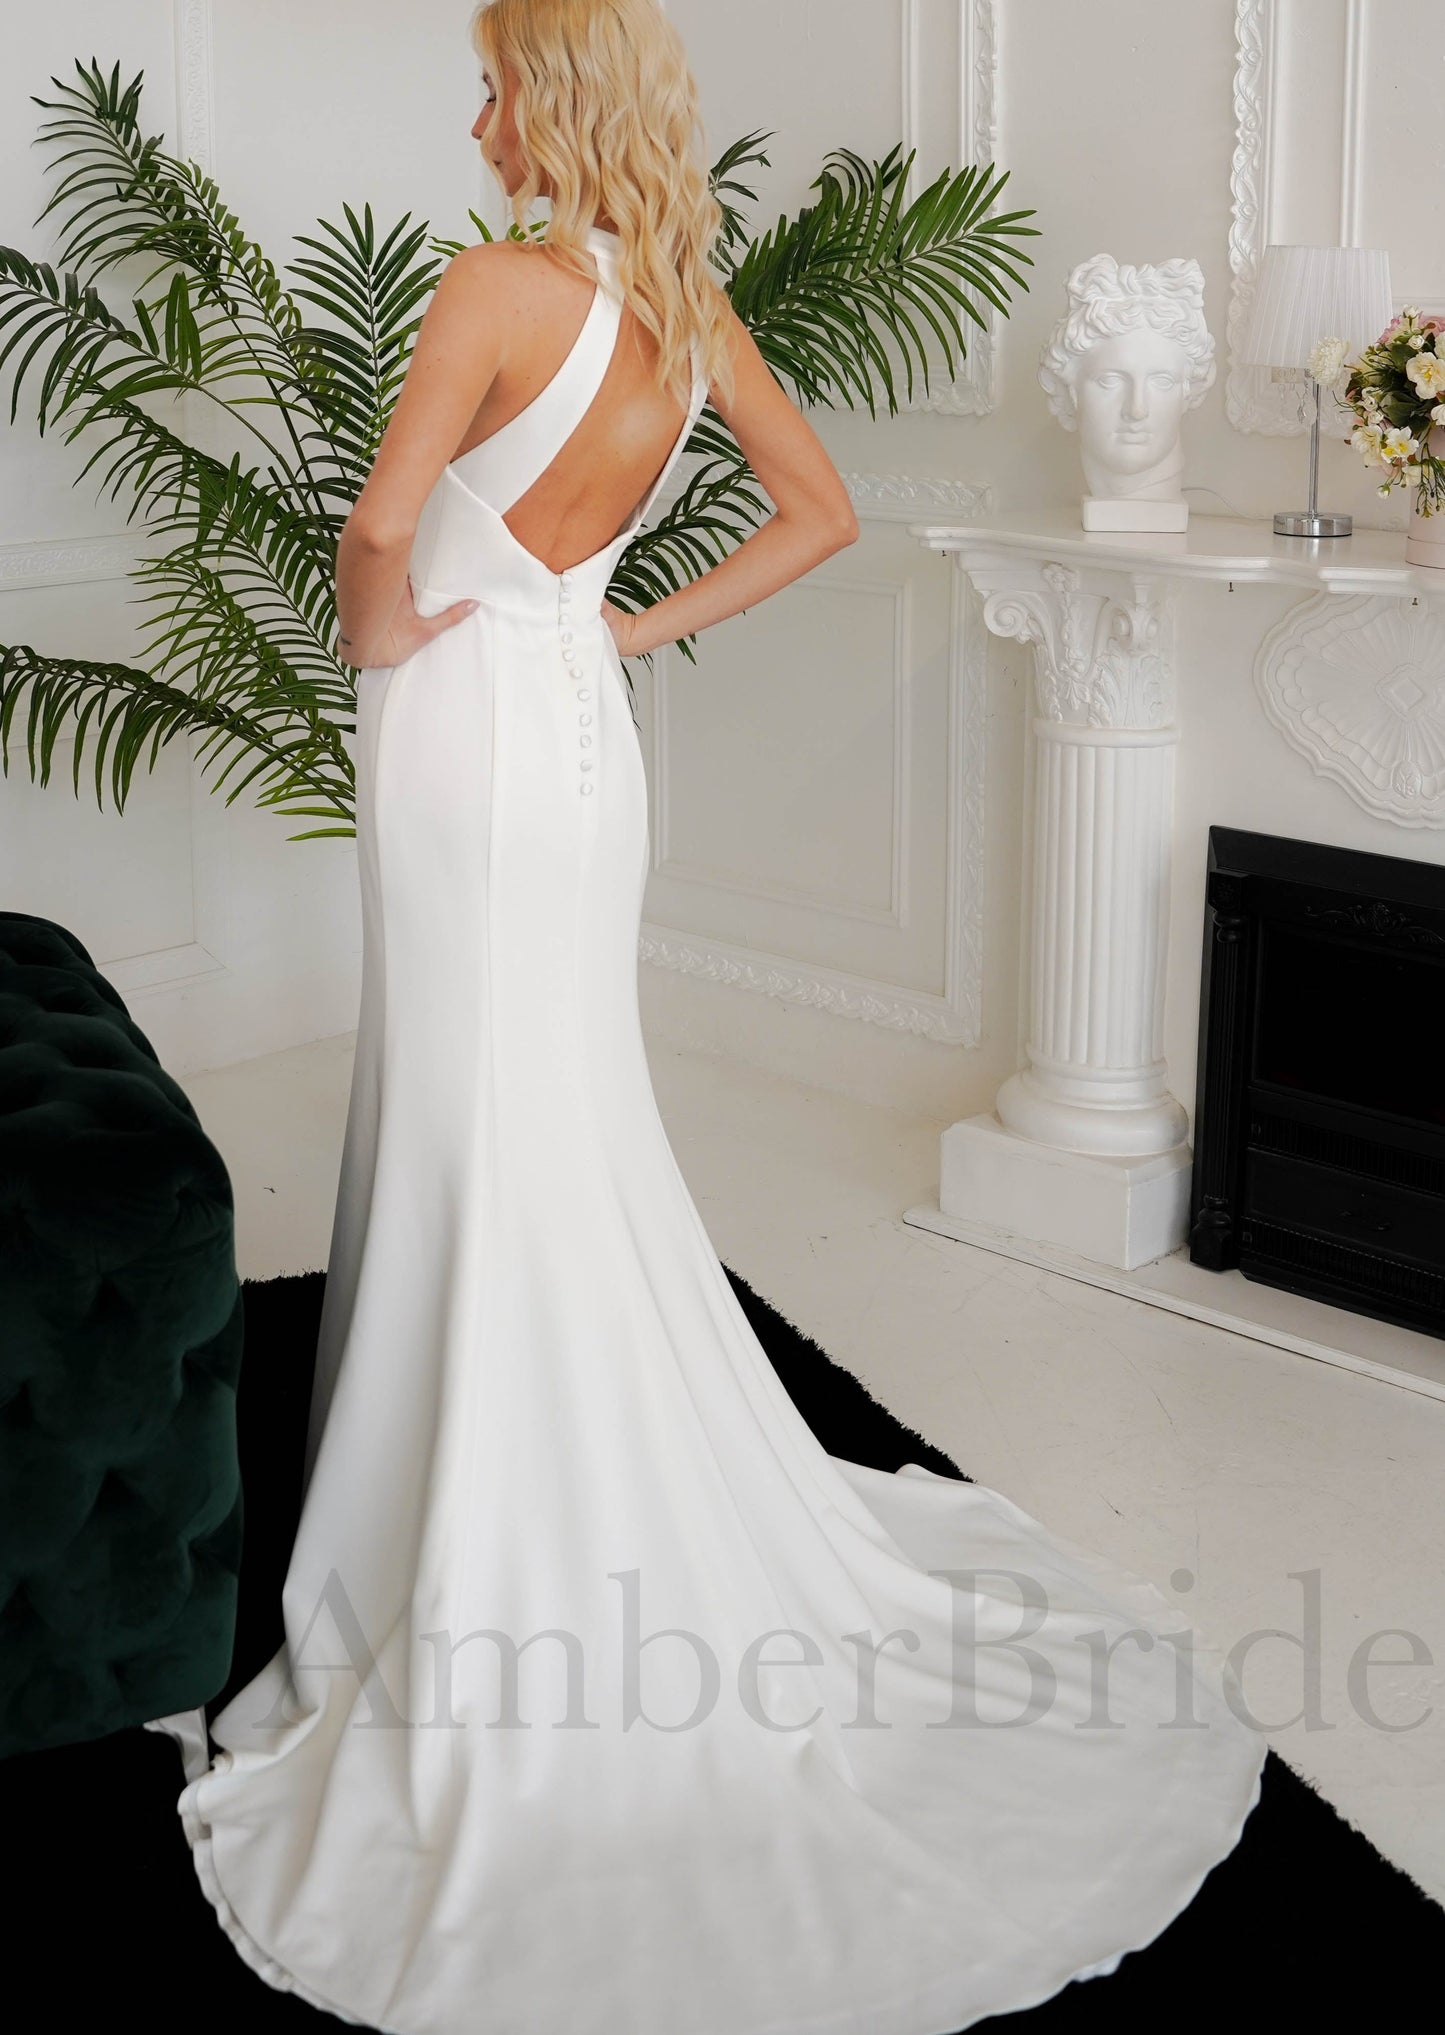 Simple Mermaid Satin Wedding Dress with Halter Neck and Backless Design